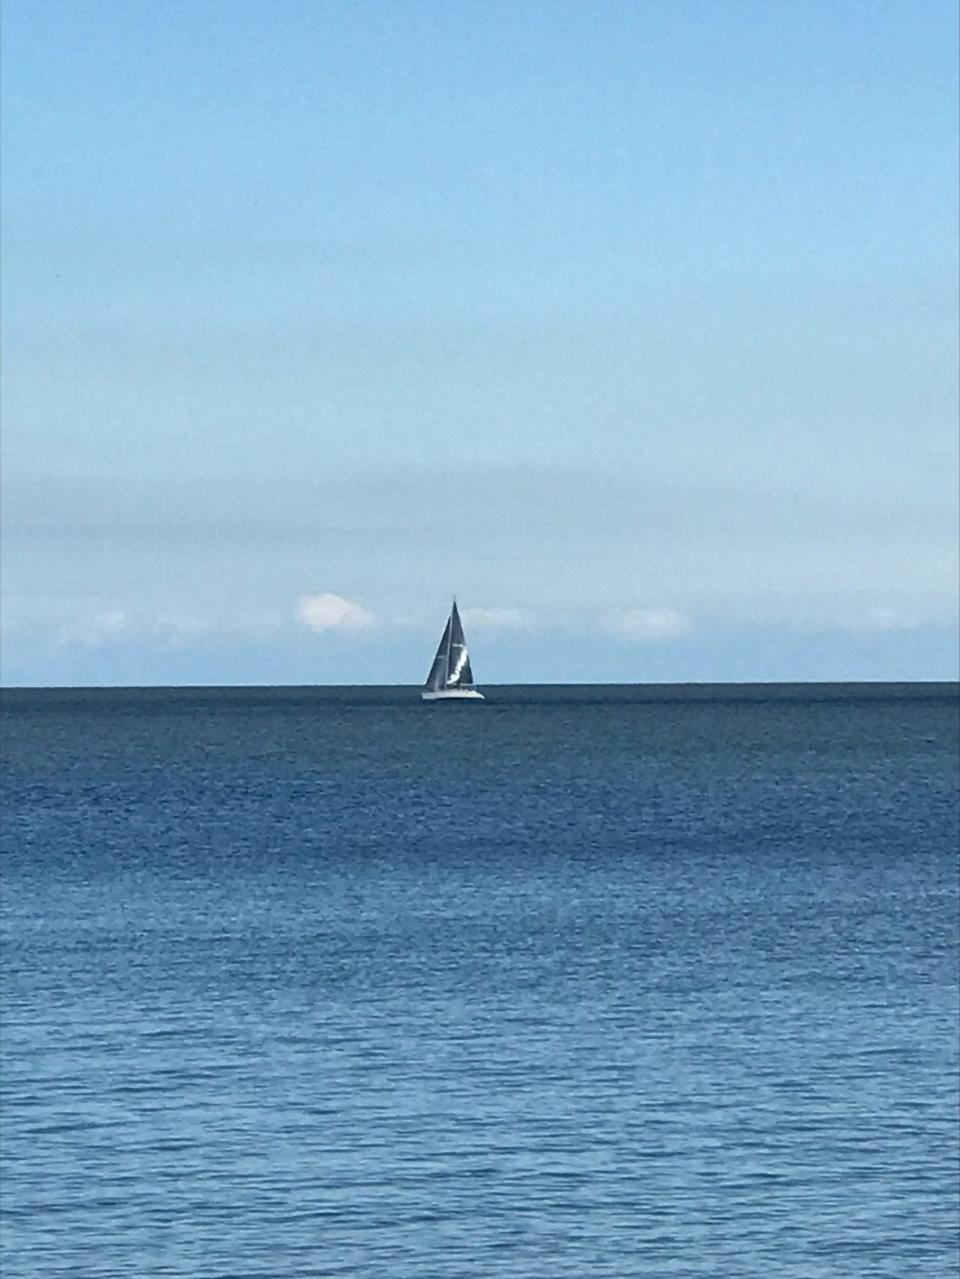 Come sail away. A lone sailboat crosses a calm Lake Erie. Provided by Jim Laroy